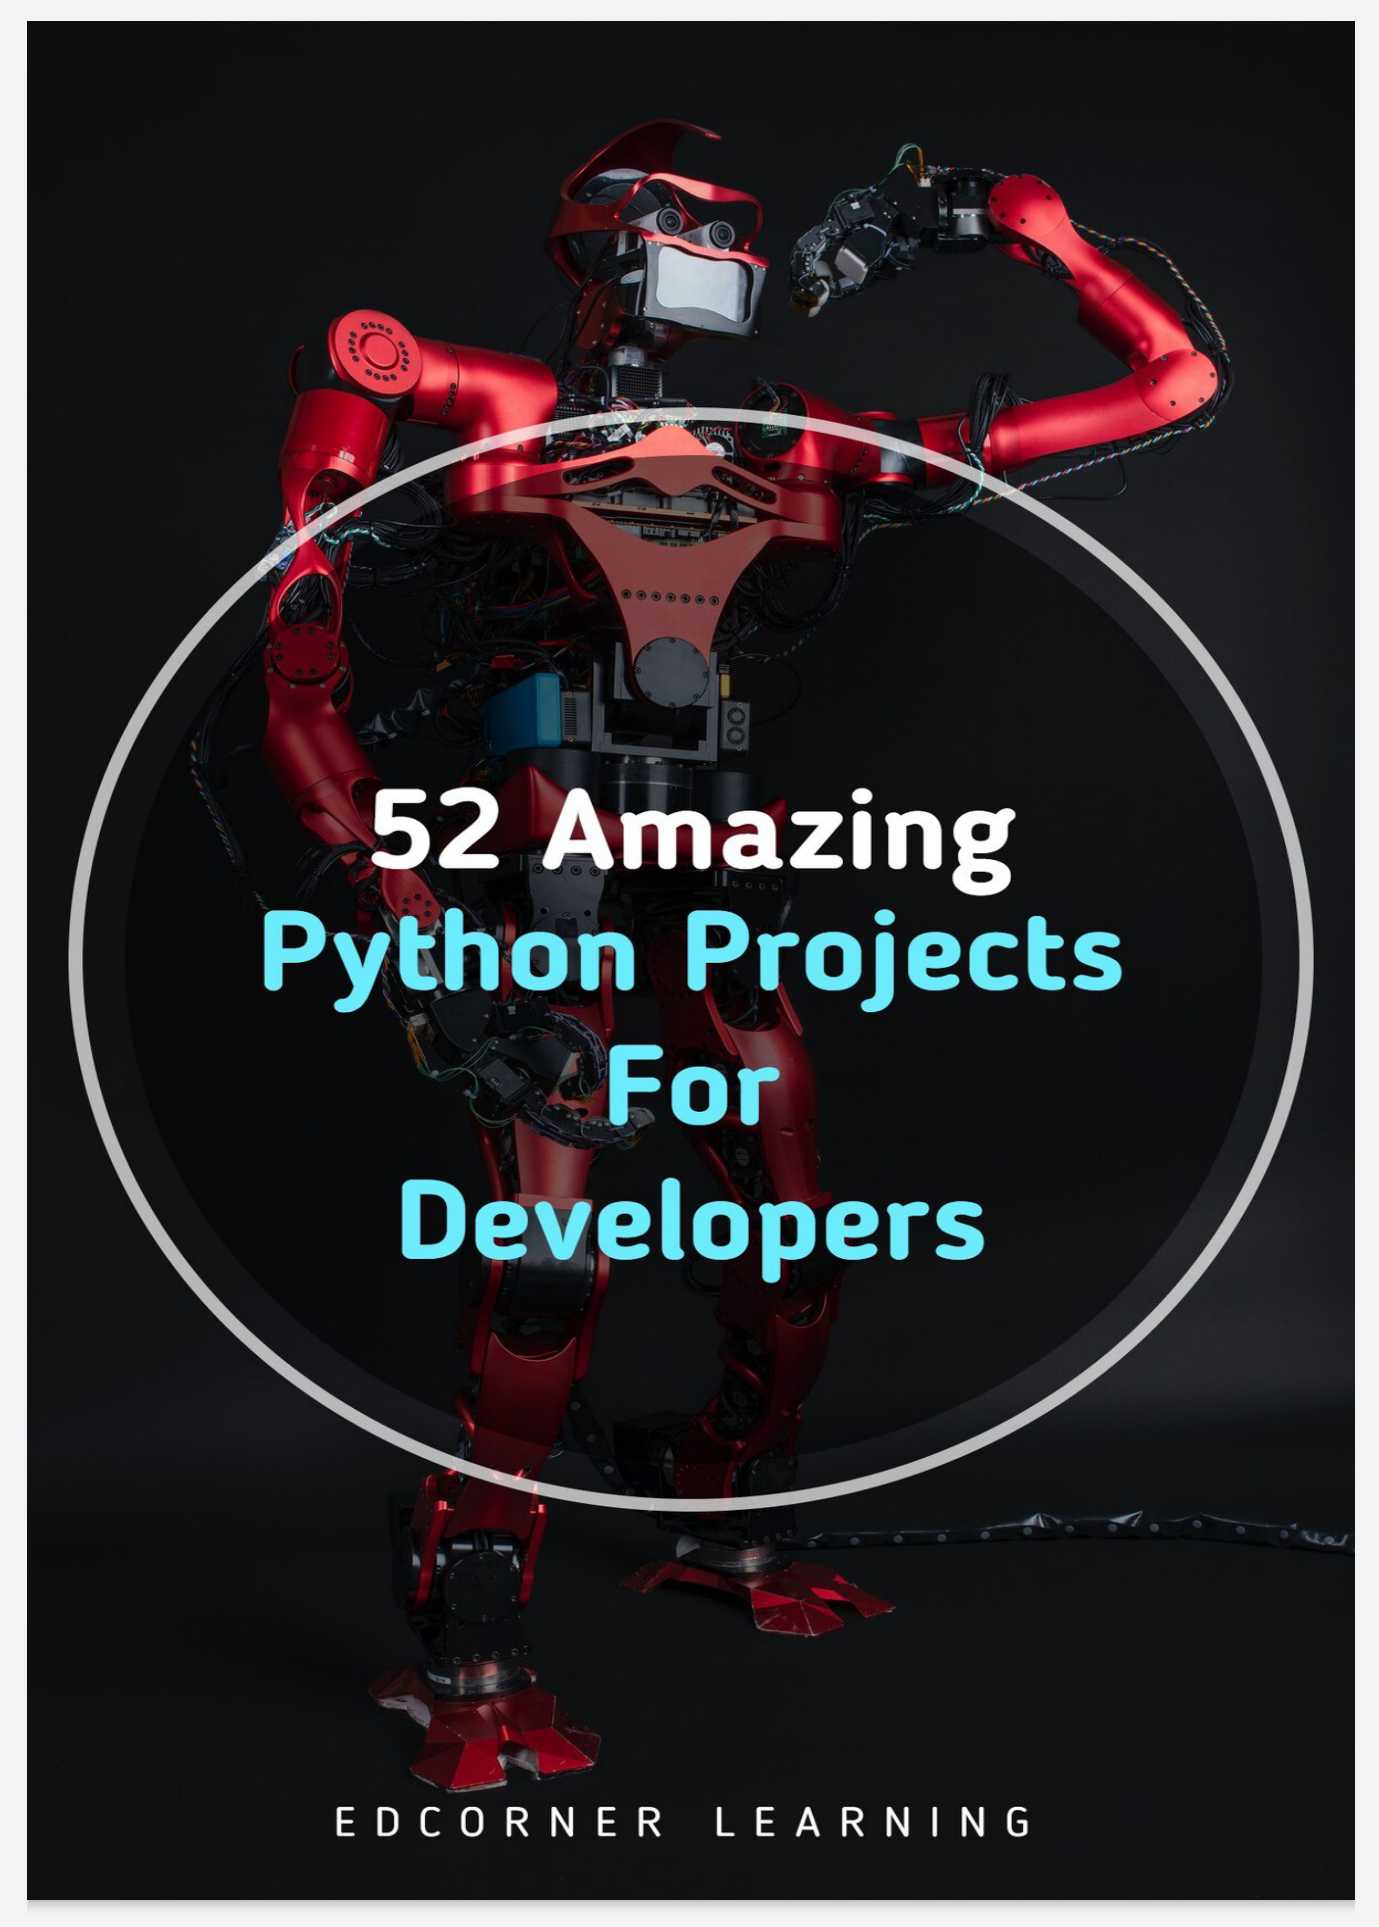 52 Amazing Python Projects For Developers